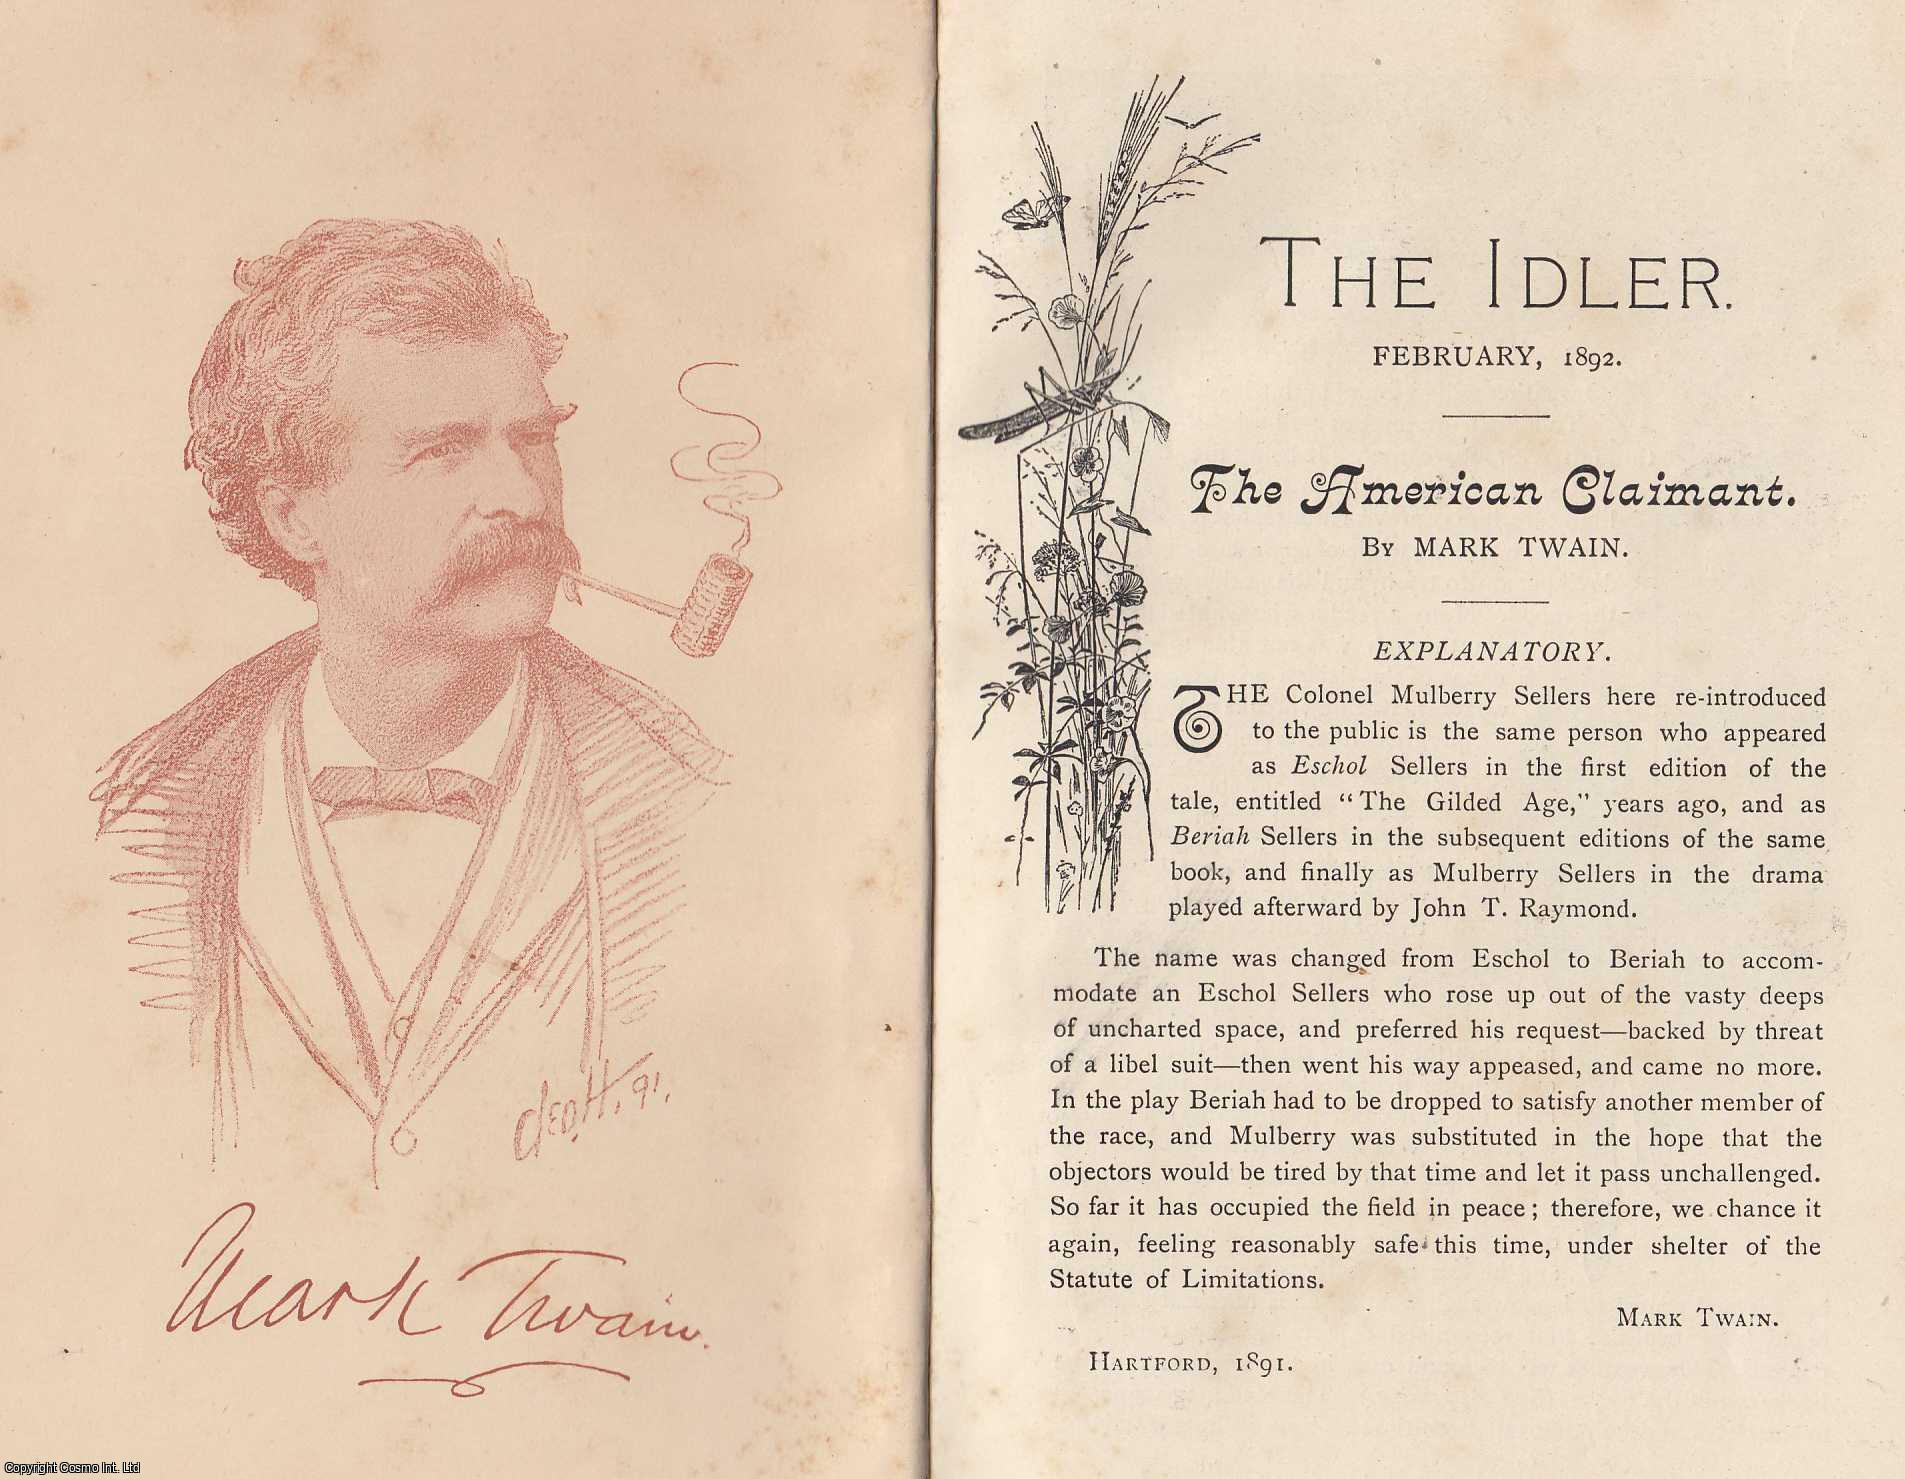 Mark Twain - The American Claimant. The complete series of chapters from the Idler Magazine, 1892-93.